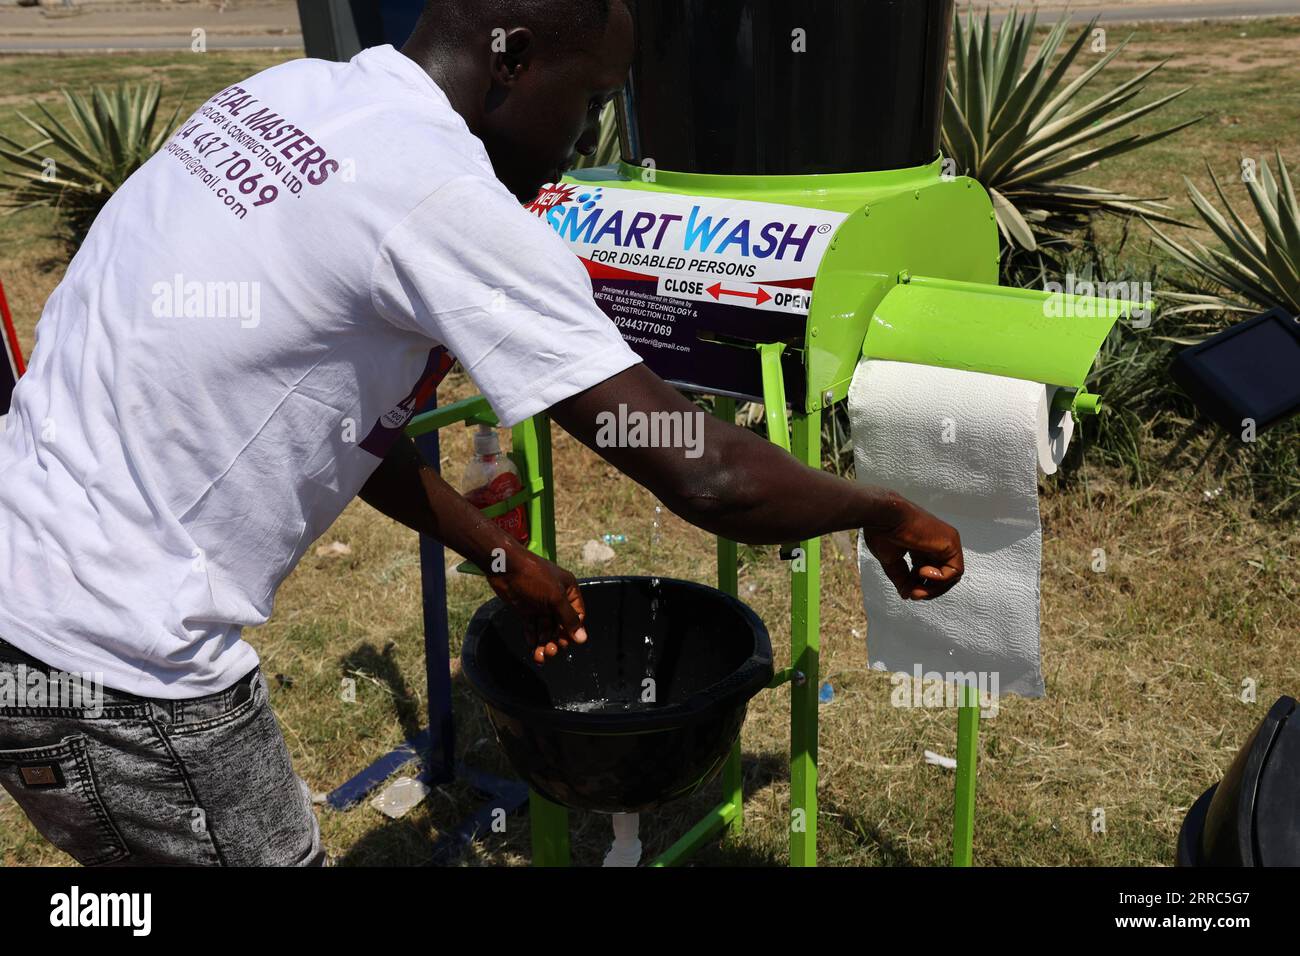 211019 -- ACCRA, Oct. 19, 2021 -- A worker demonstrates the proper way to use a handwashing facility in Accra, Ghana, on Oct. 15, 2021. The ongoing COVID-19 pandemic that lasted for more than a year in Ghana has not only prompted citizens to care more about their hand hygiene, but spurred local inventors to come up with more creative ways to cater to people s needs for handwashing, particularly in public. TO GO WITH Feature: Ghanaian inventors bring out creative handwashing facilities to combat COVID-19  GHANA-ACCRA-COVID-19-INVENTION-WASHING FACILITY XuxZheng PUBLICATIONxNOTxINxCHN Stock Photo